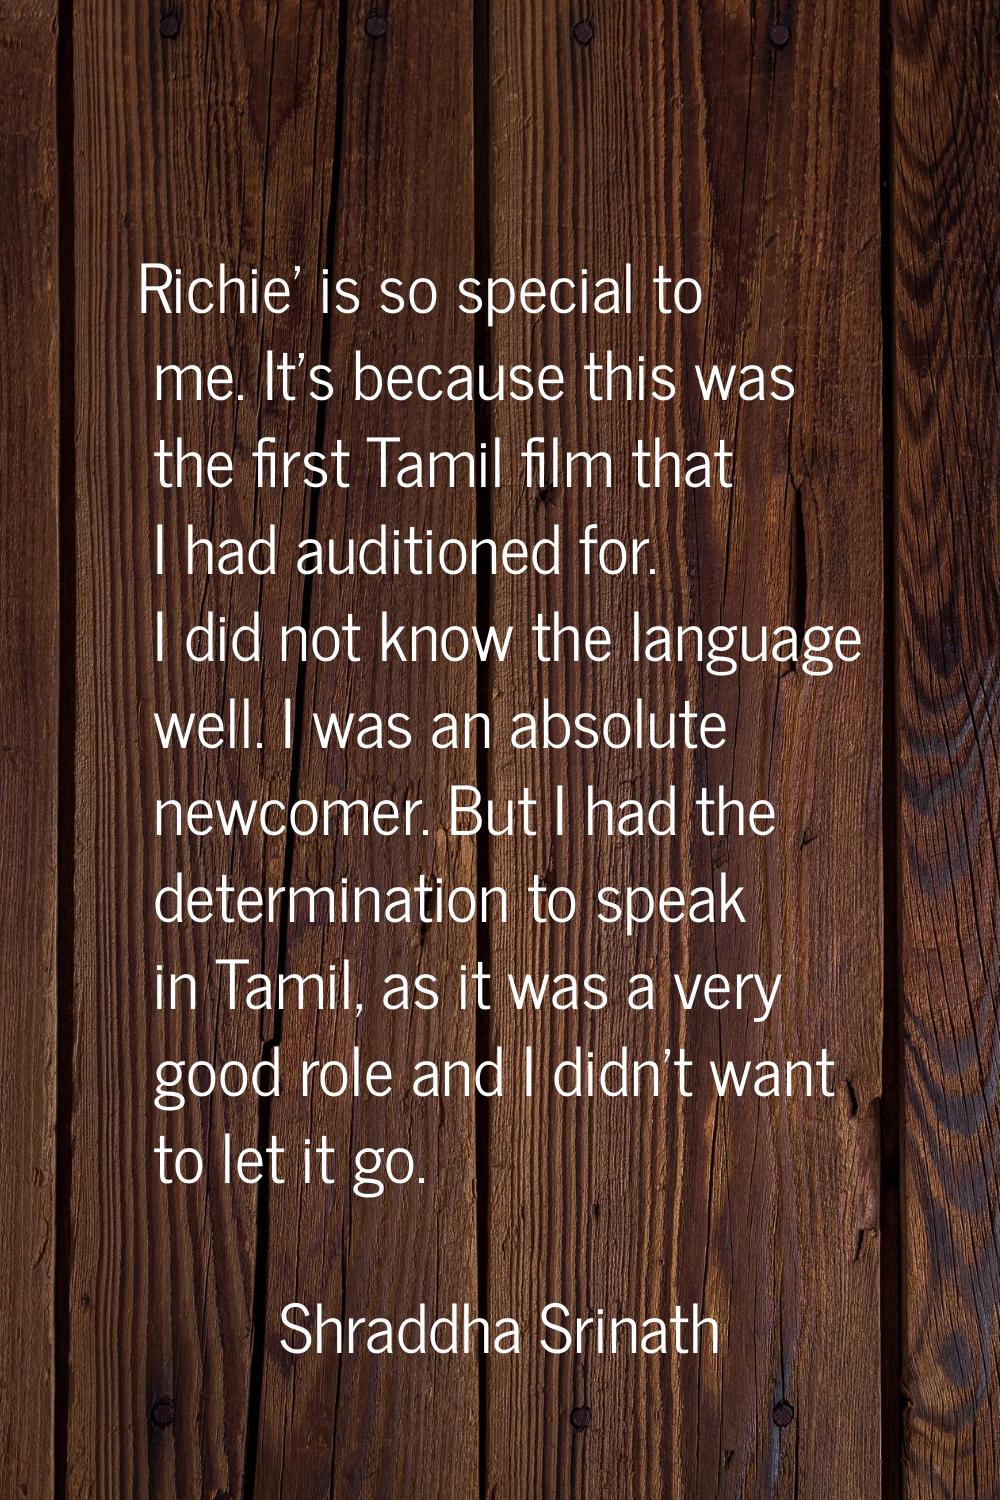 Richie' is so special to me. It's because this was the first Tamil film that I had auditioned for. 